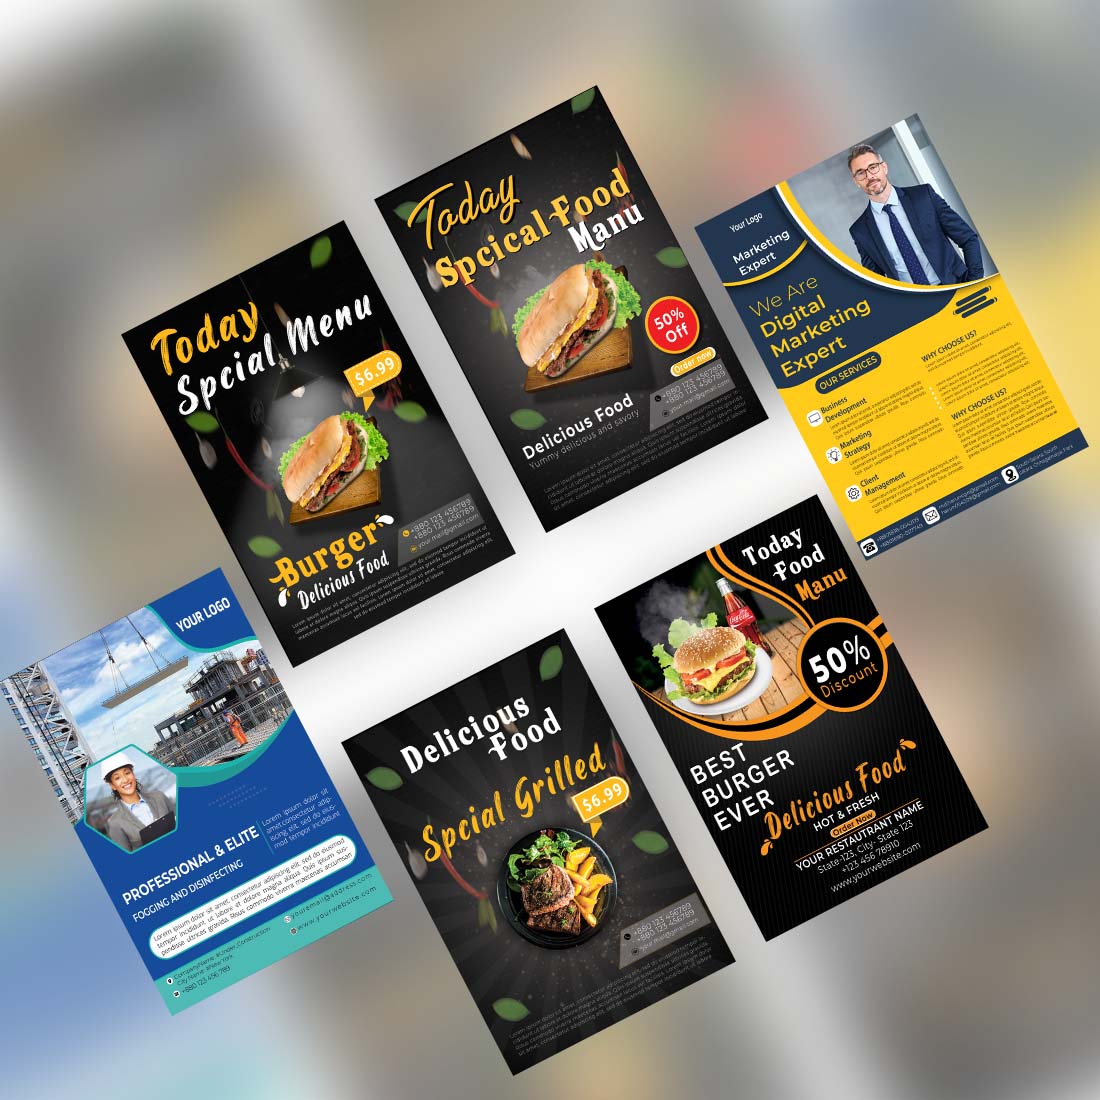 6 Flyer Design Template, Fully Editable Easy to Change Colors and Text cover.